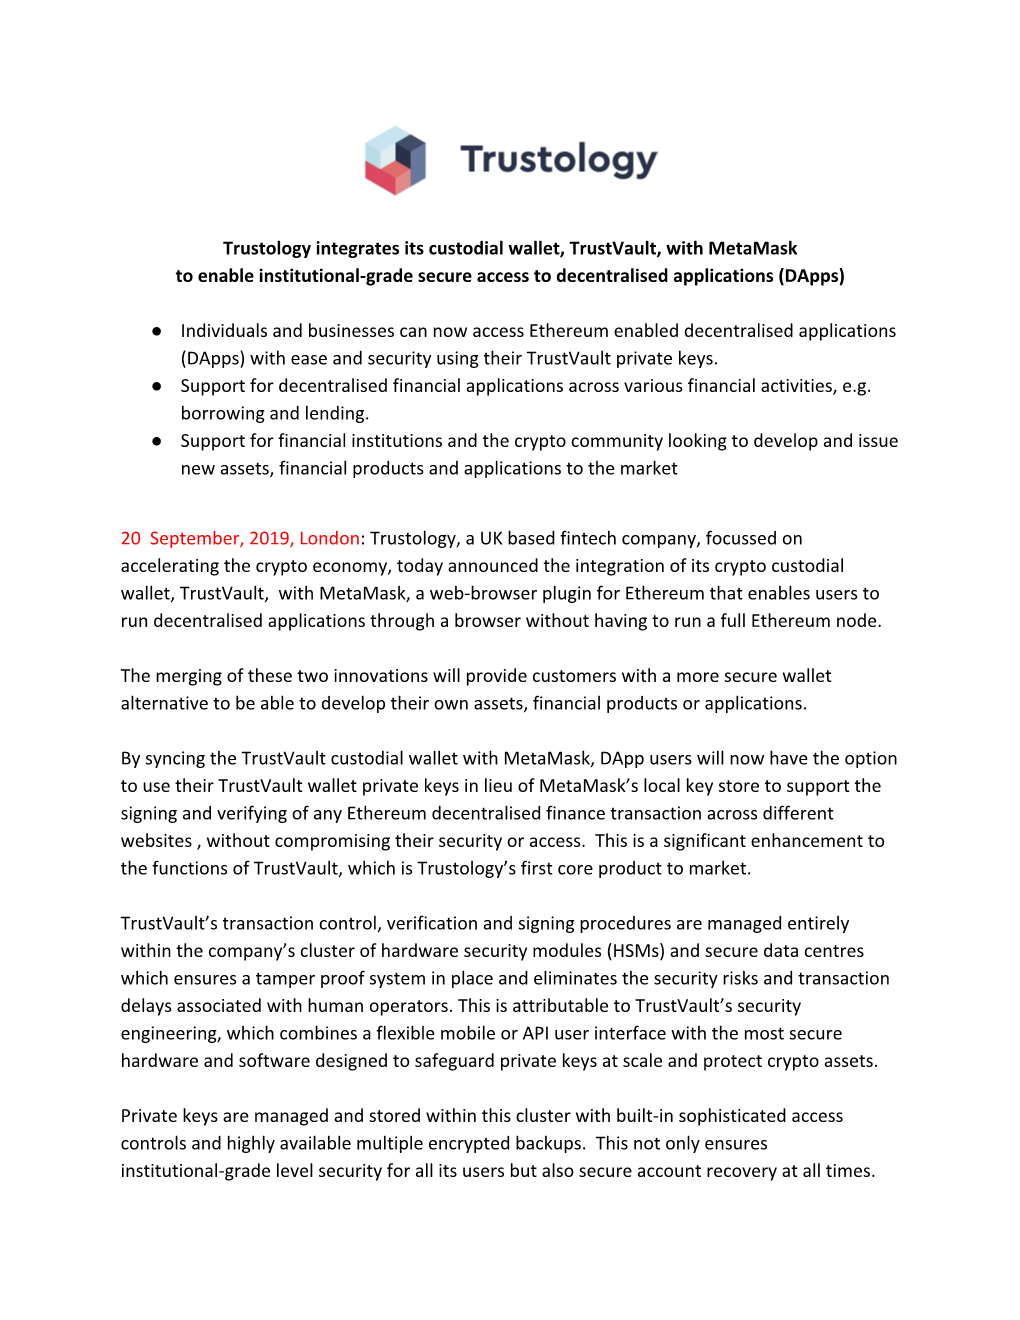 Trustology Integrates Its Custodial Wallet, Trustvault, with Metamask to Enable Institutional-Grade Secure Access to Decentralised Applications (Dapps)